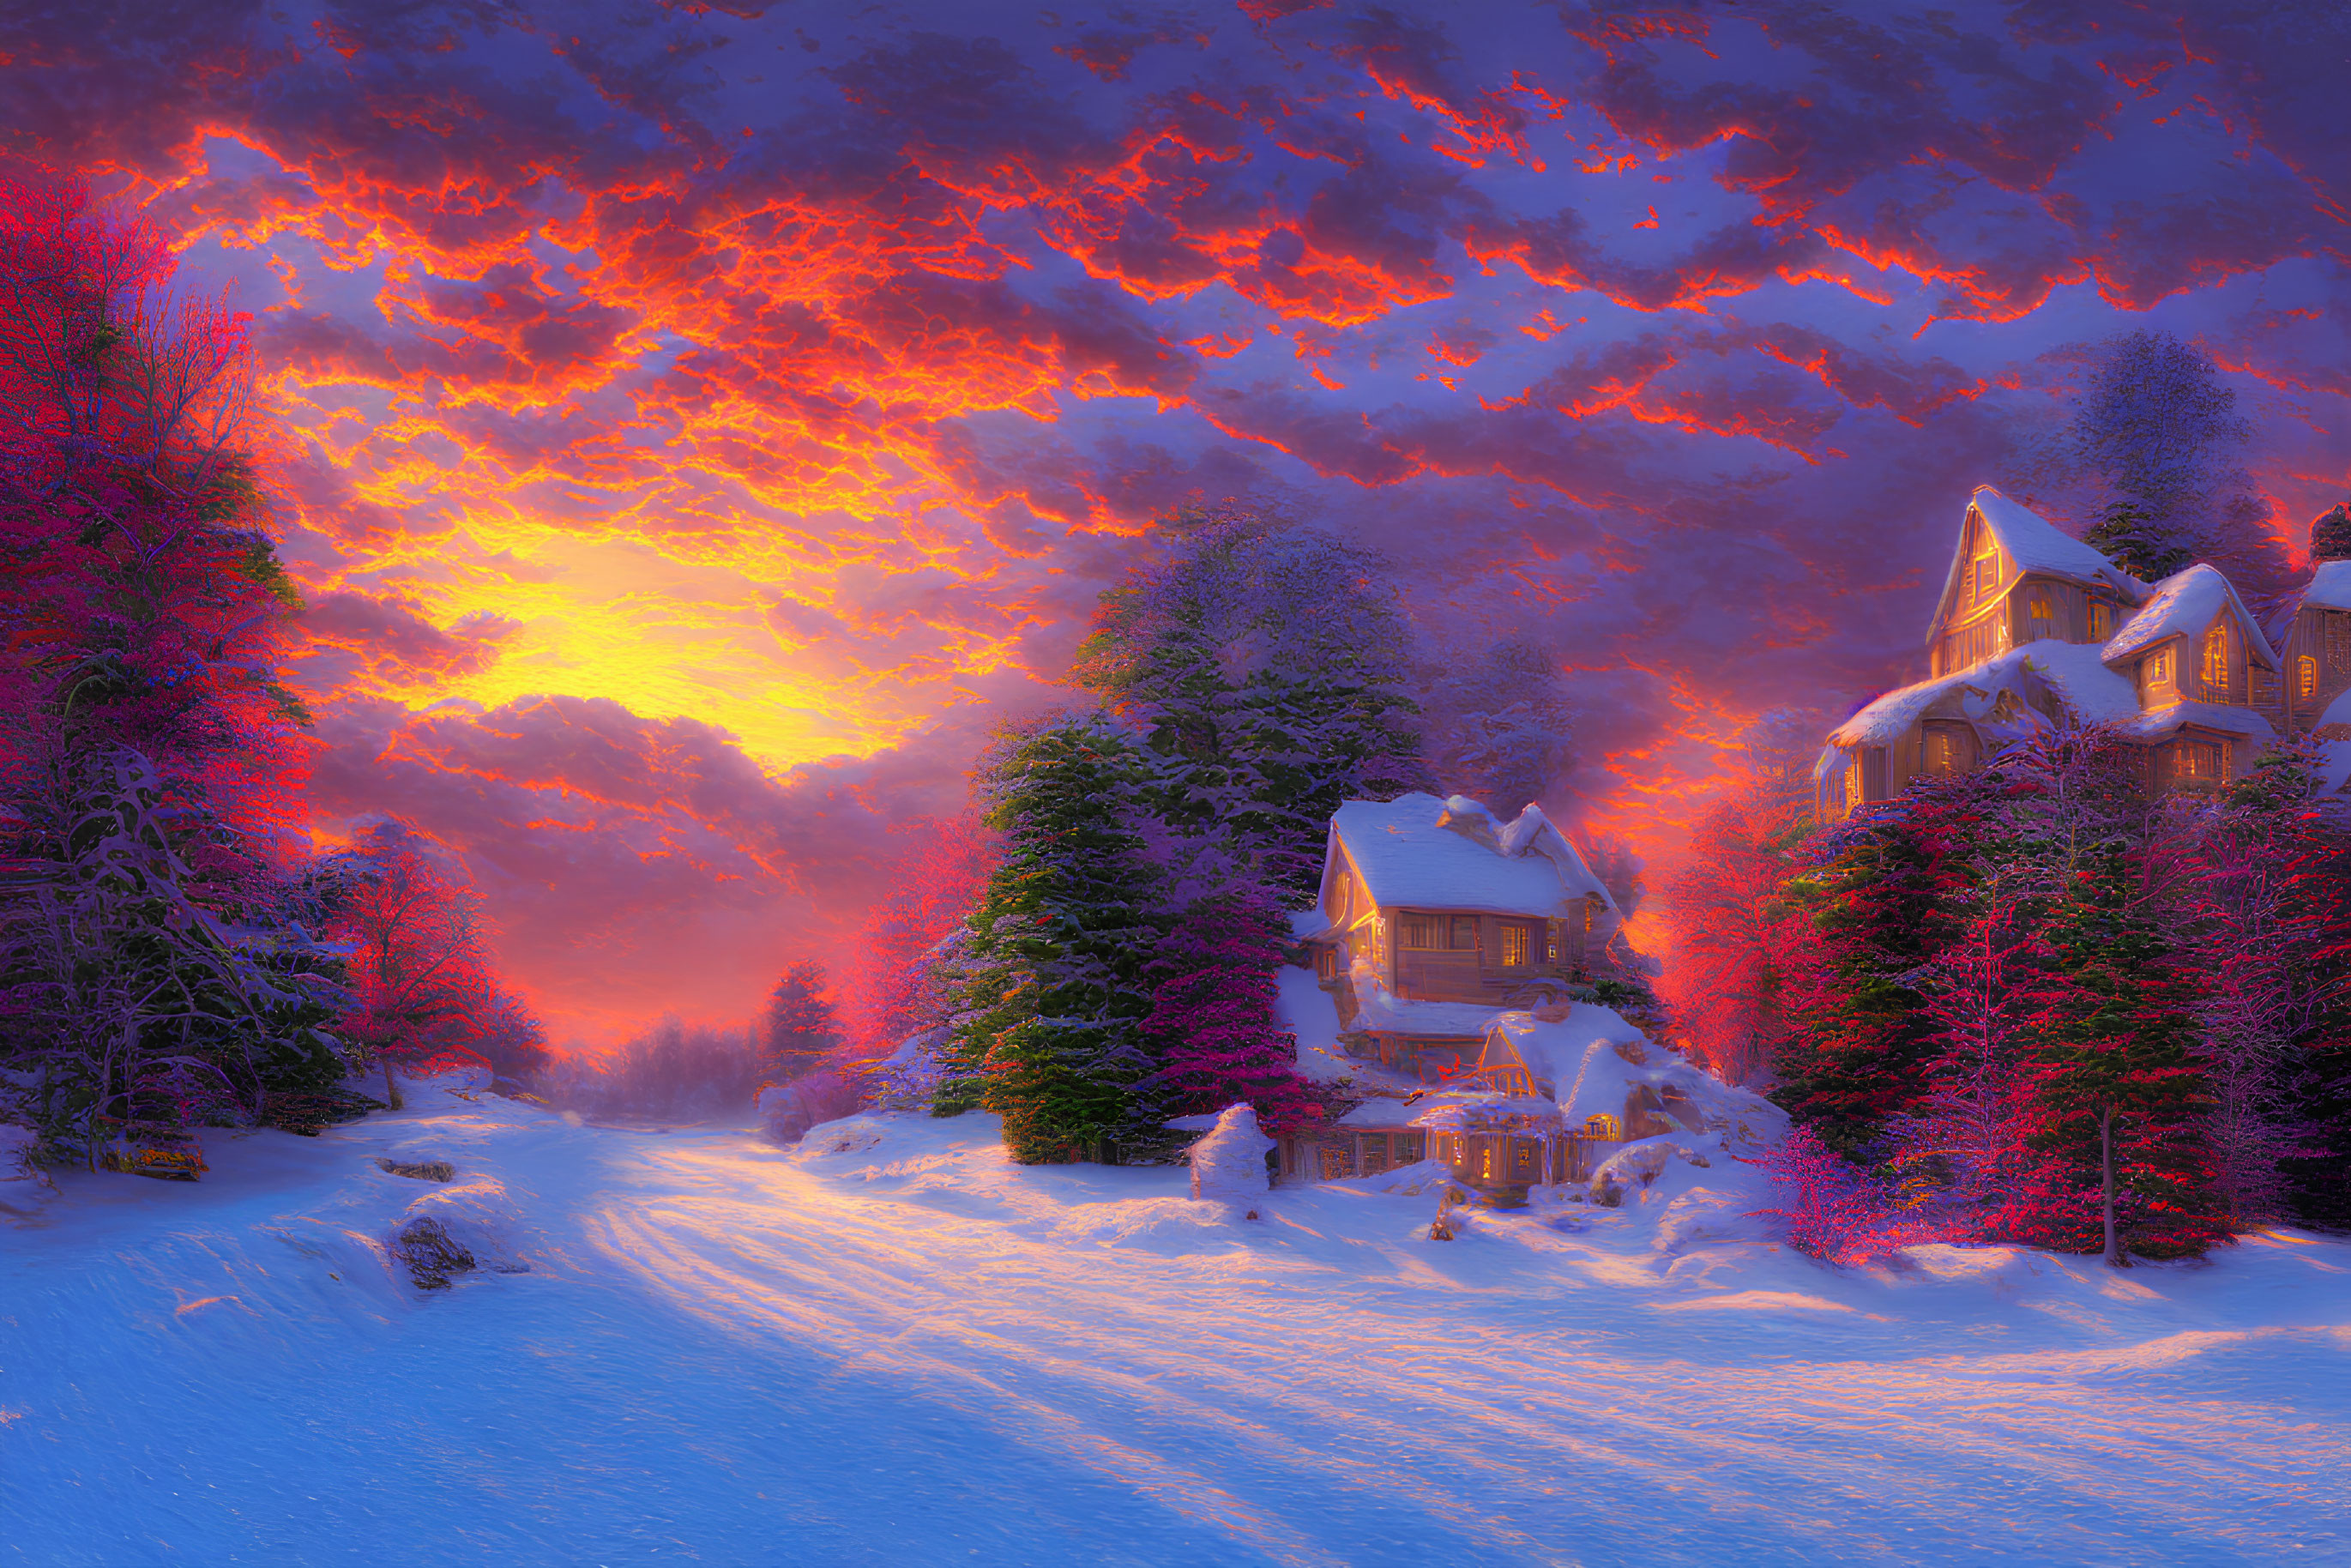 Red Sky Over Snow